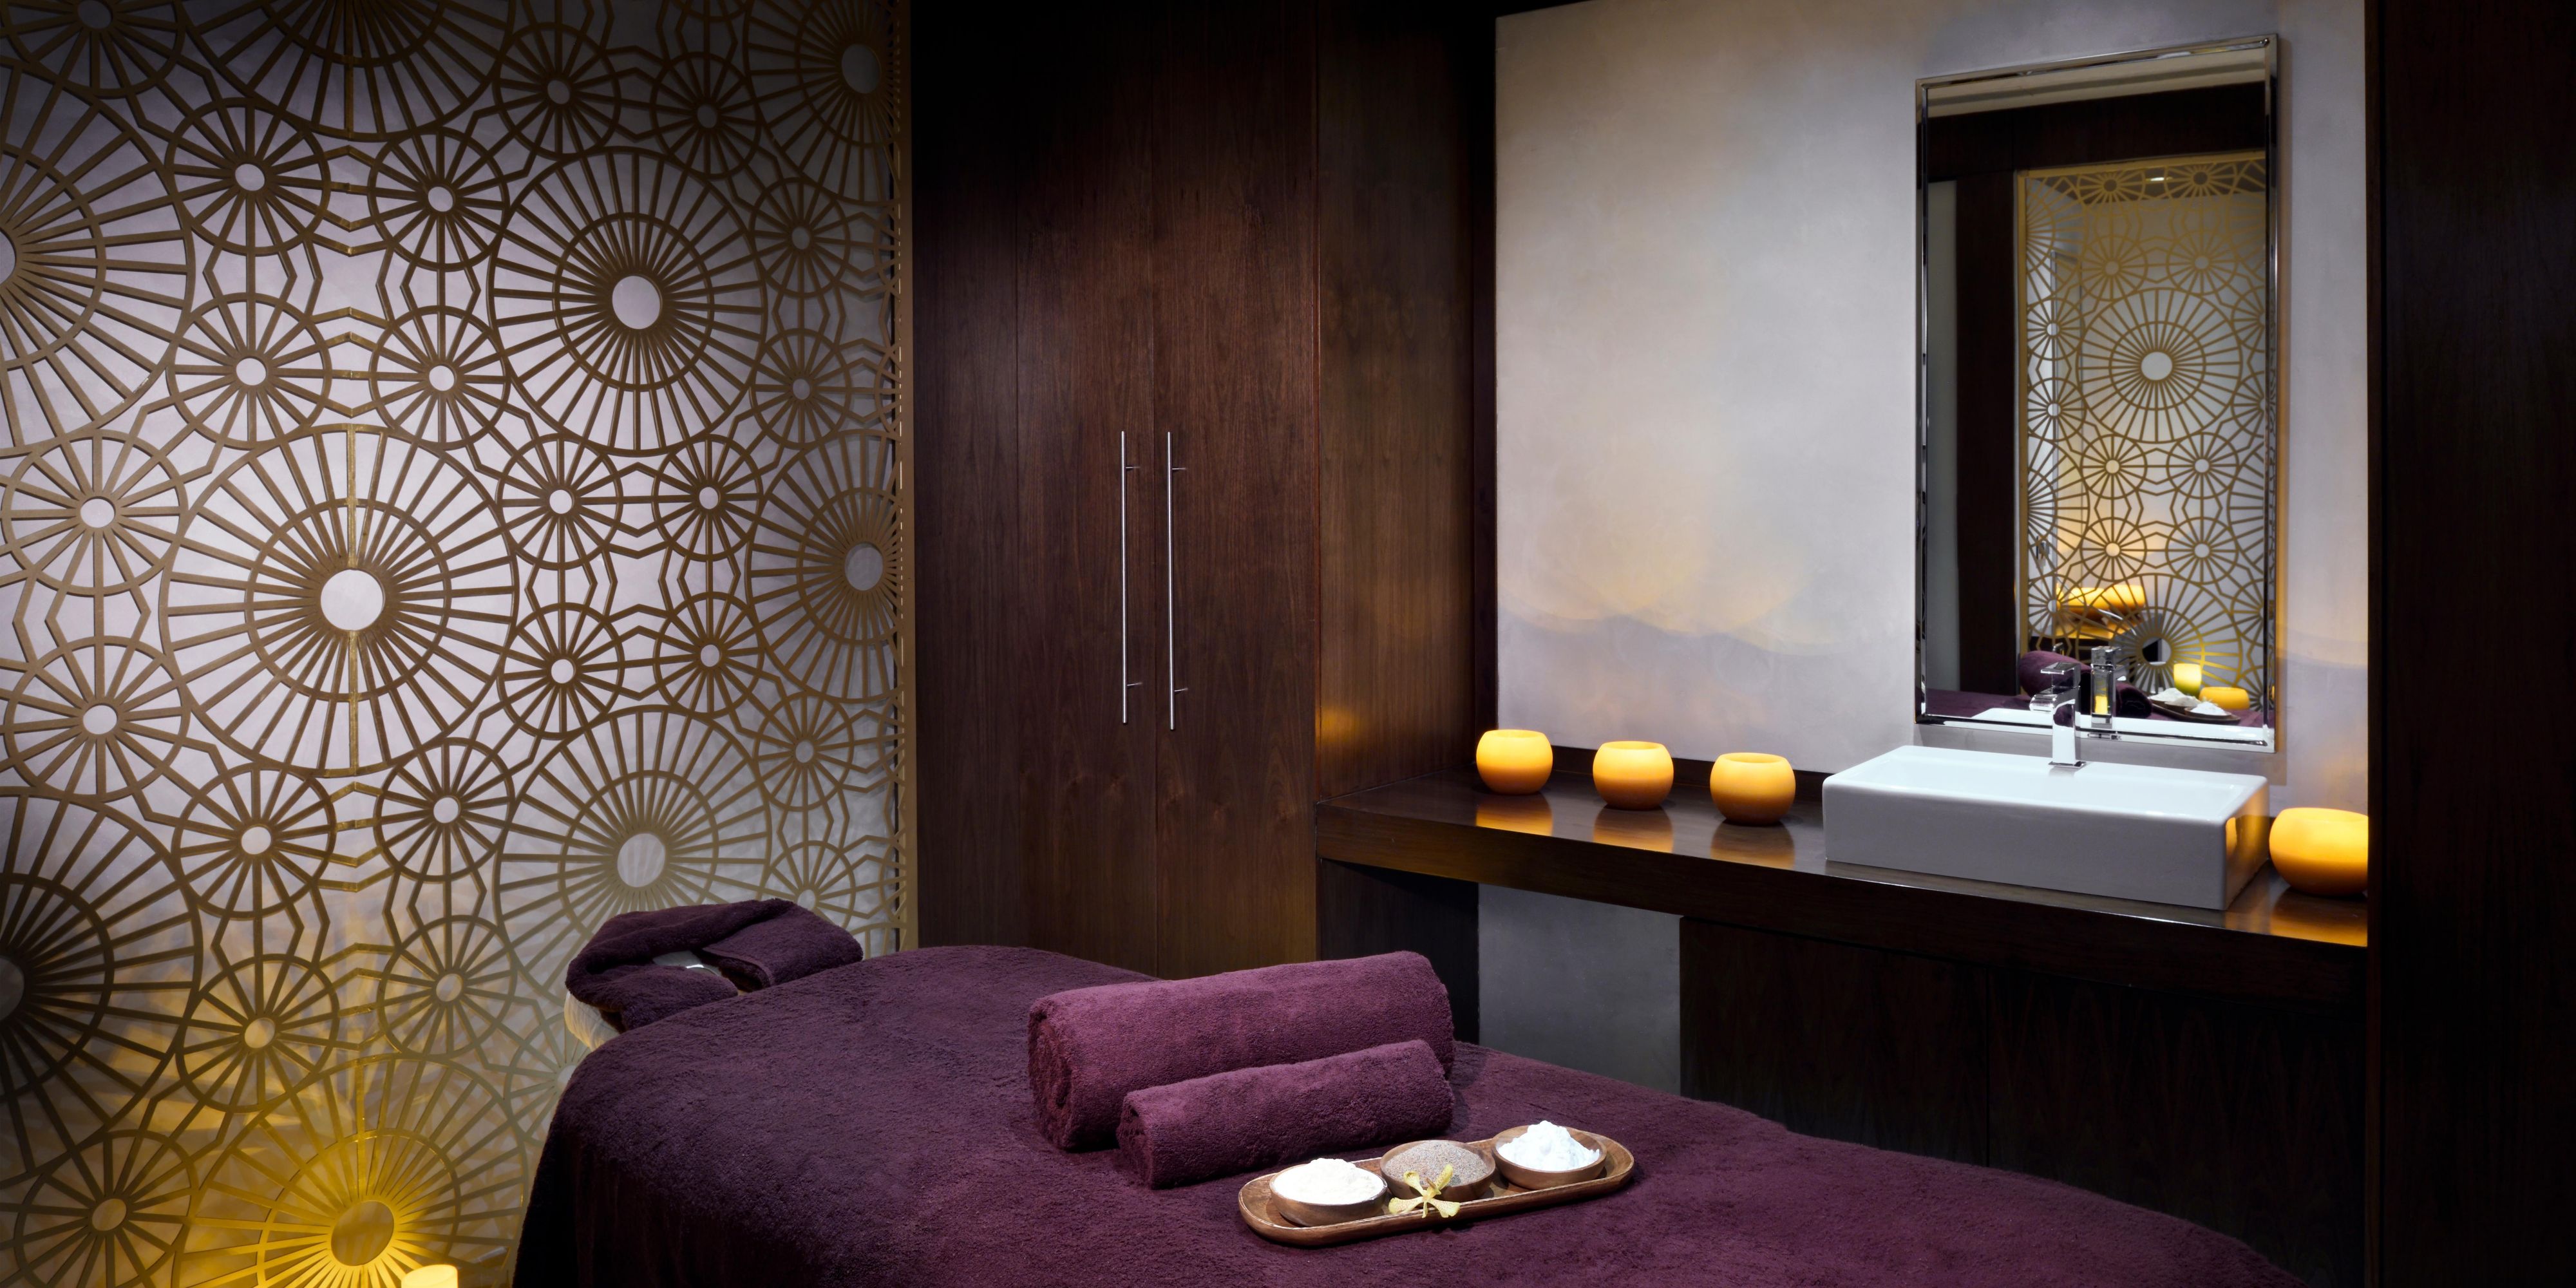 For a tranquil hideaway away from the hustle of the city life, 
 award winning Soul Spa is a luxurious, serene haven with 6 individual therapy rooms that provide a wide variety of tailored treatments designed to unwind, balance and uplift. The spa features whirlpools, massage rooms, a traditional Oriental Hammam and much more